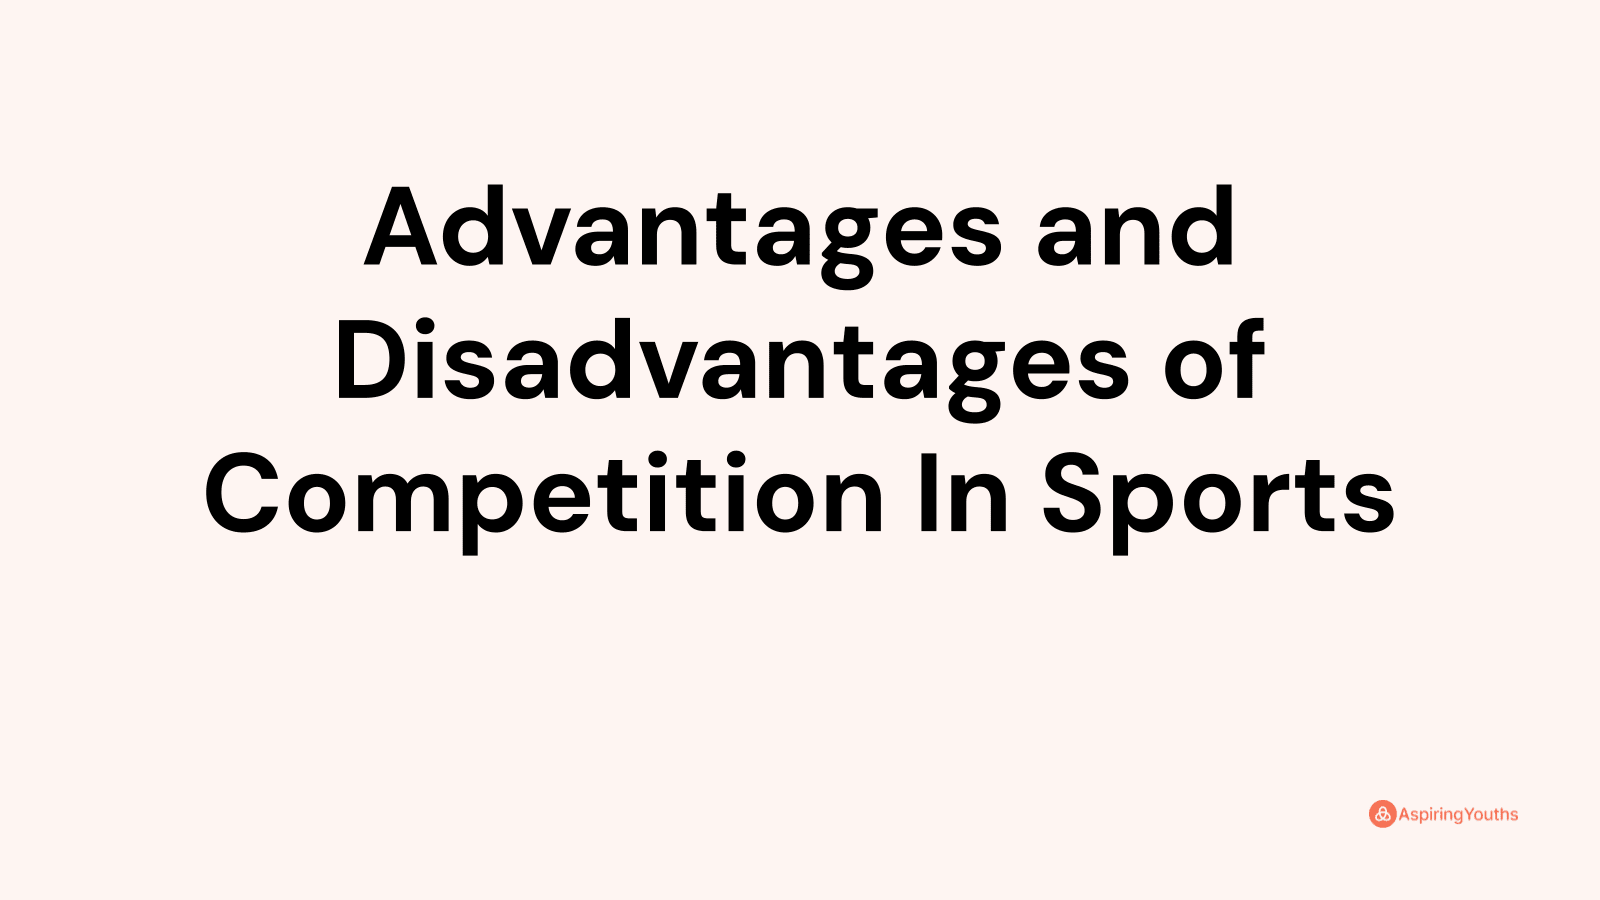 Advantages and disadvantages of Competition In Sports